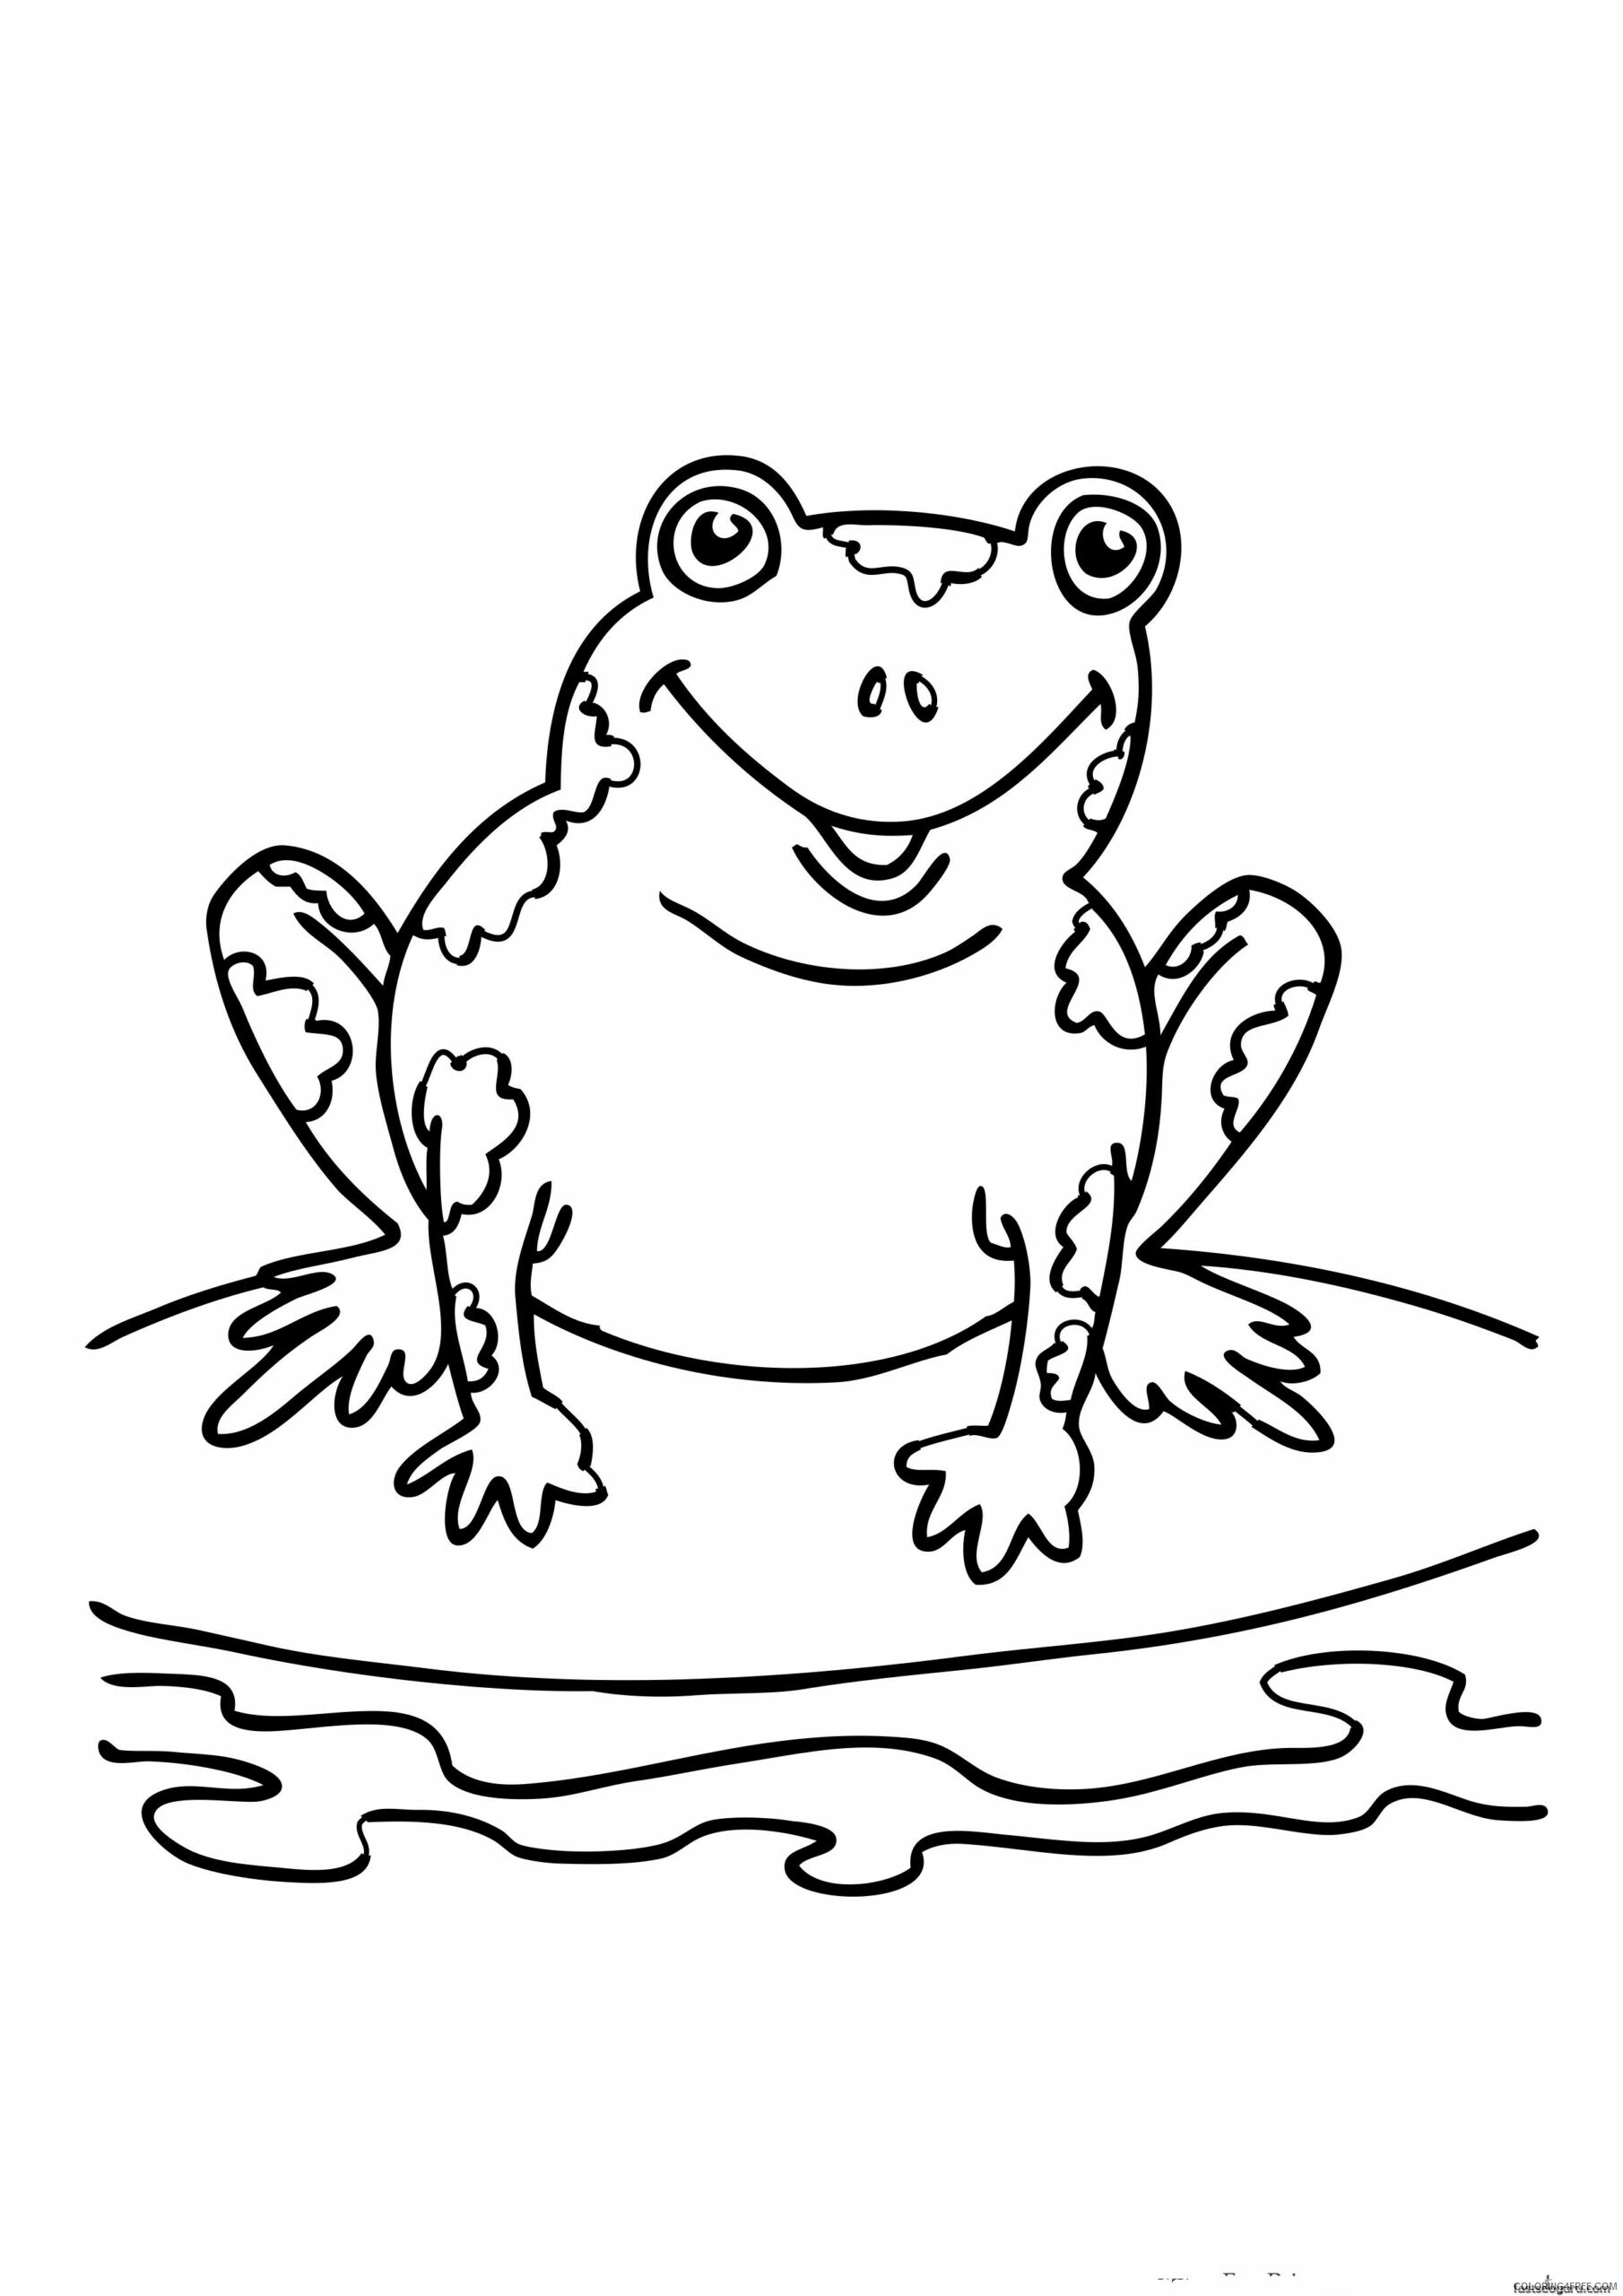 Frog Coloring Pages Animal Printable Sheets Frog 2021 2297 Coloring4free